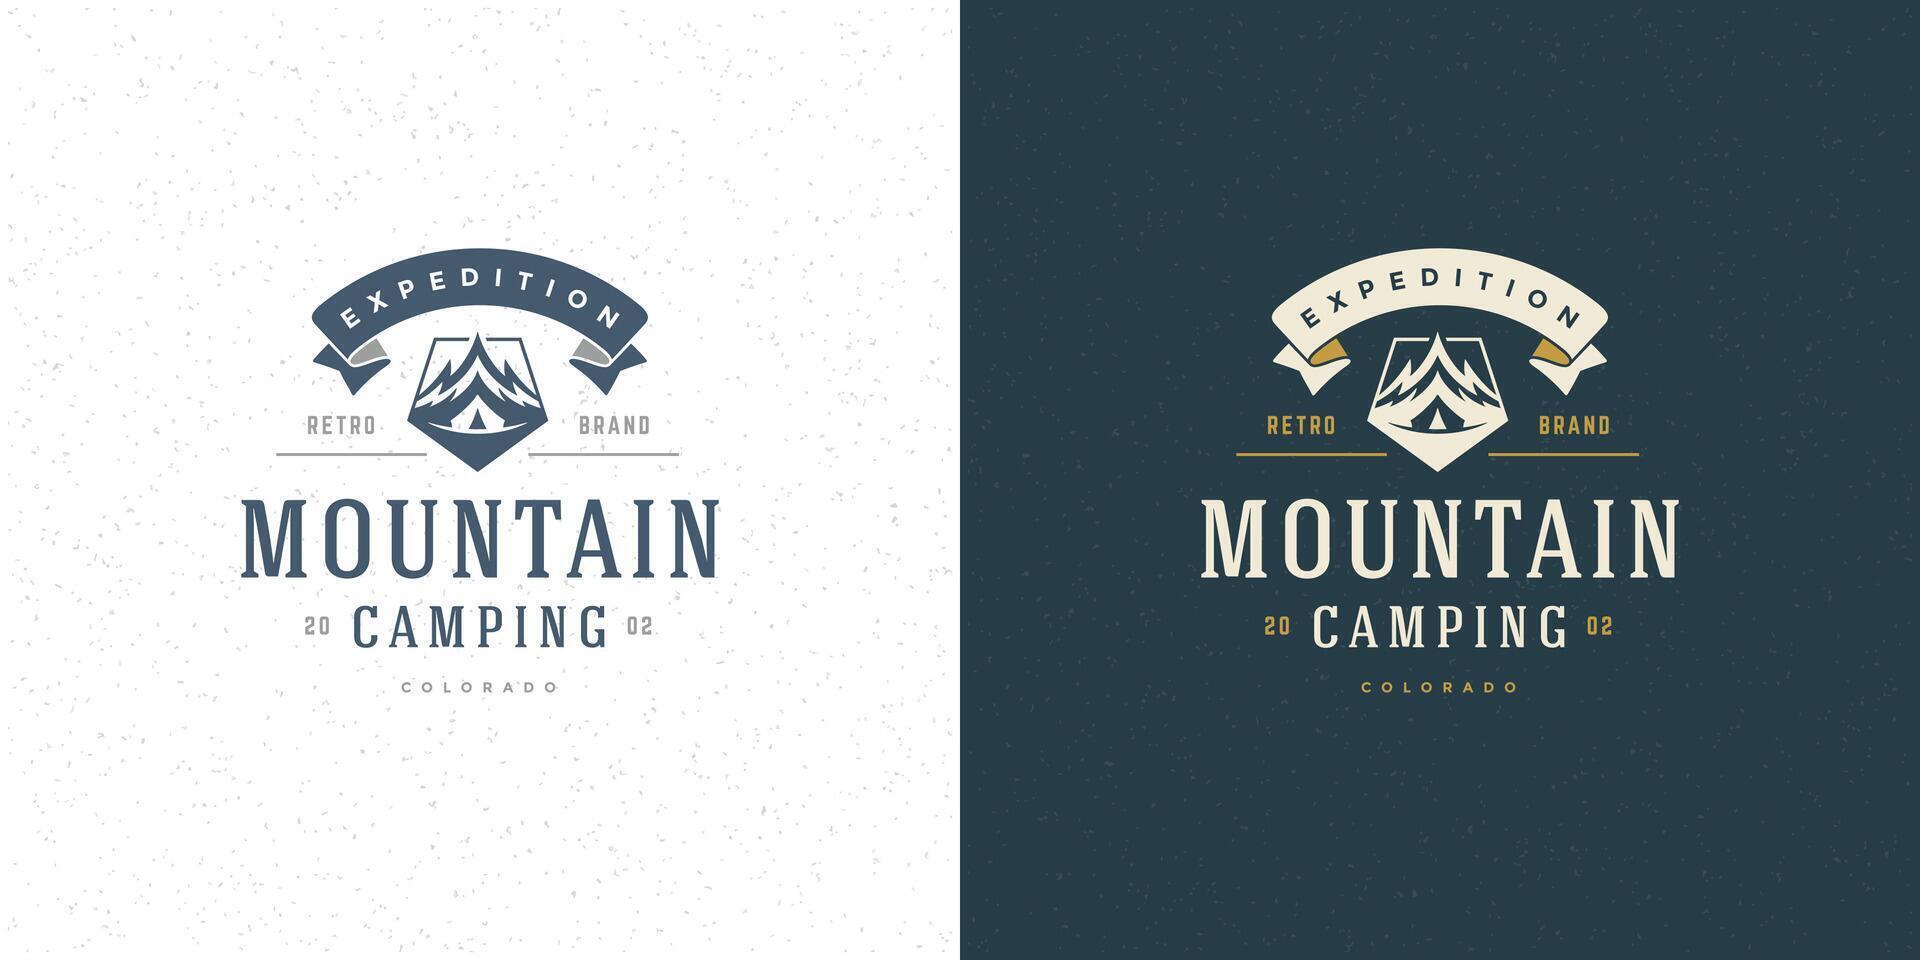 Mountains logo emblem outdoor adventure camping illustration mountain and tent silhouettes vector